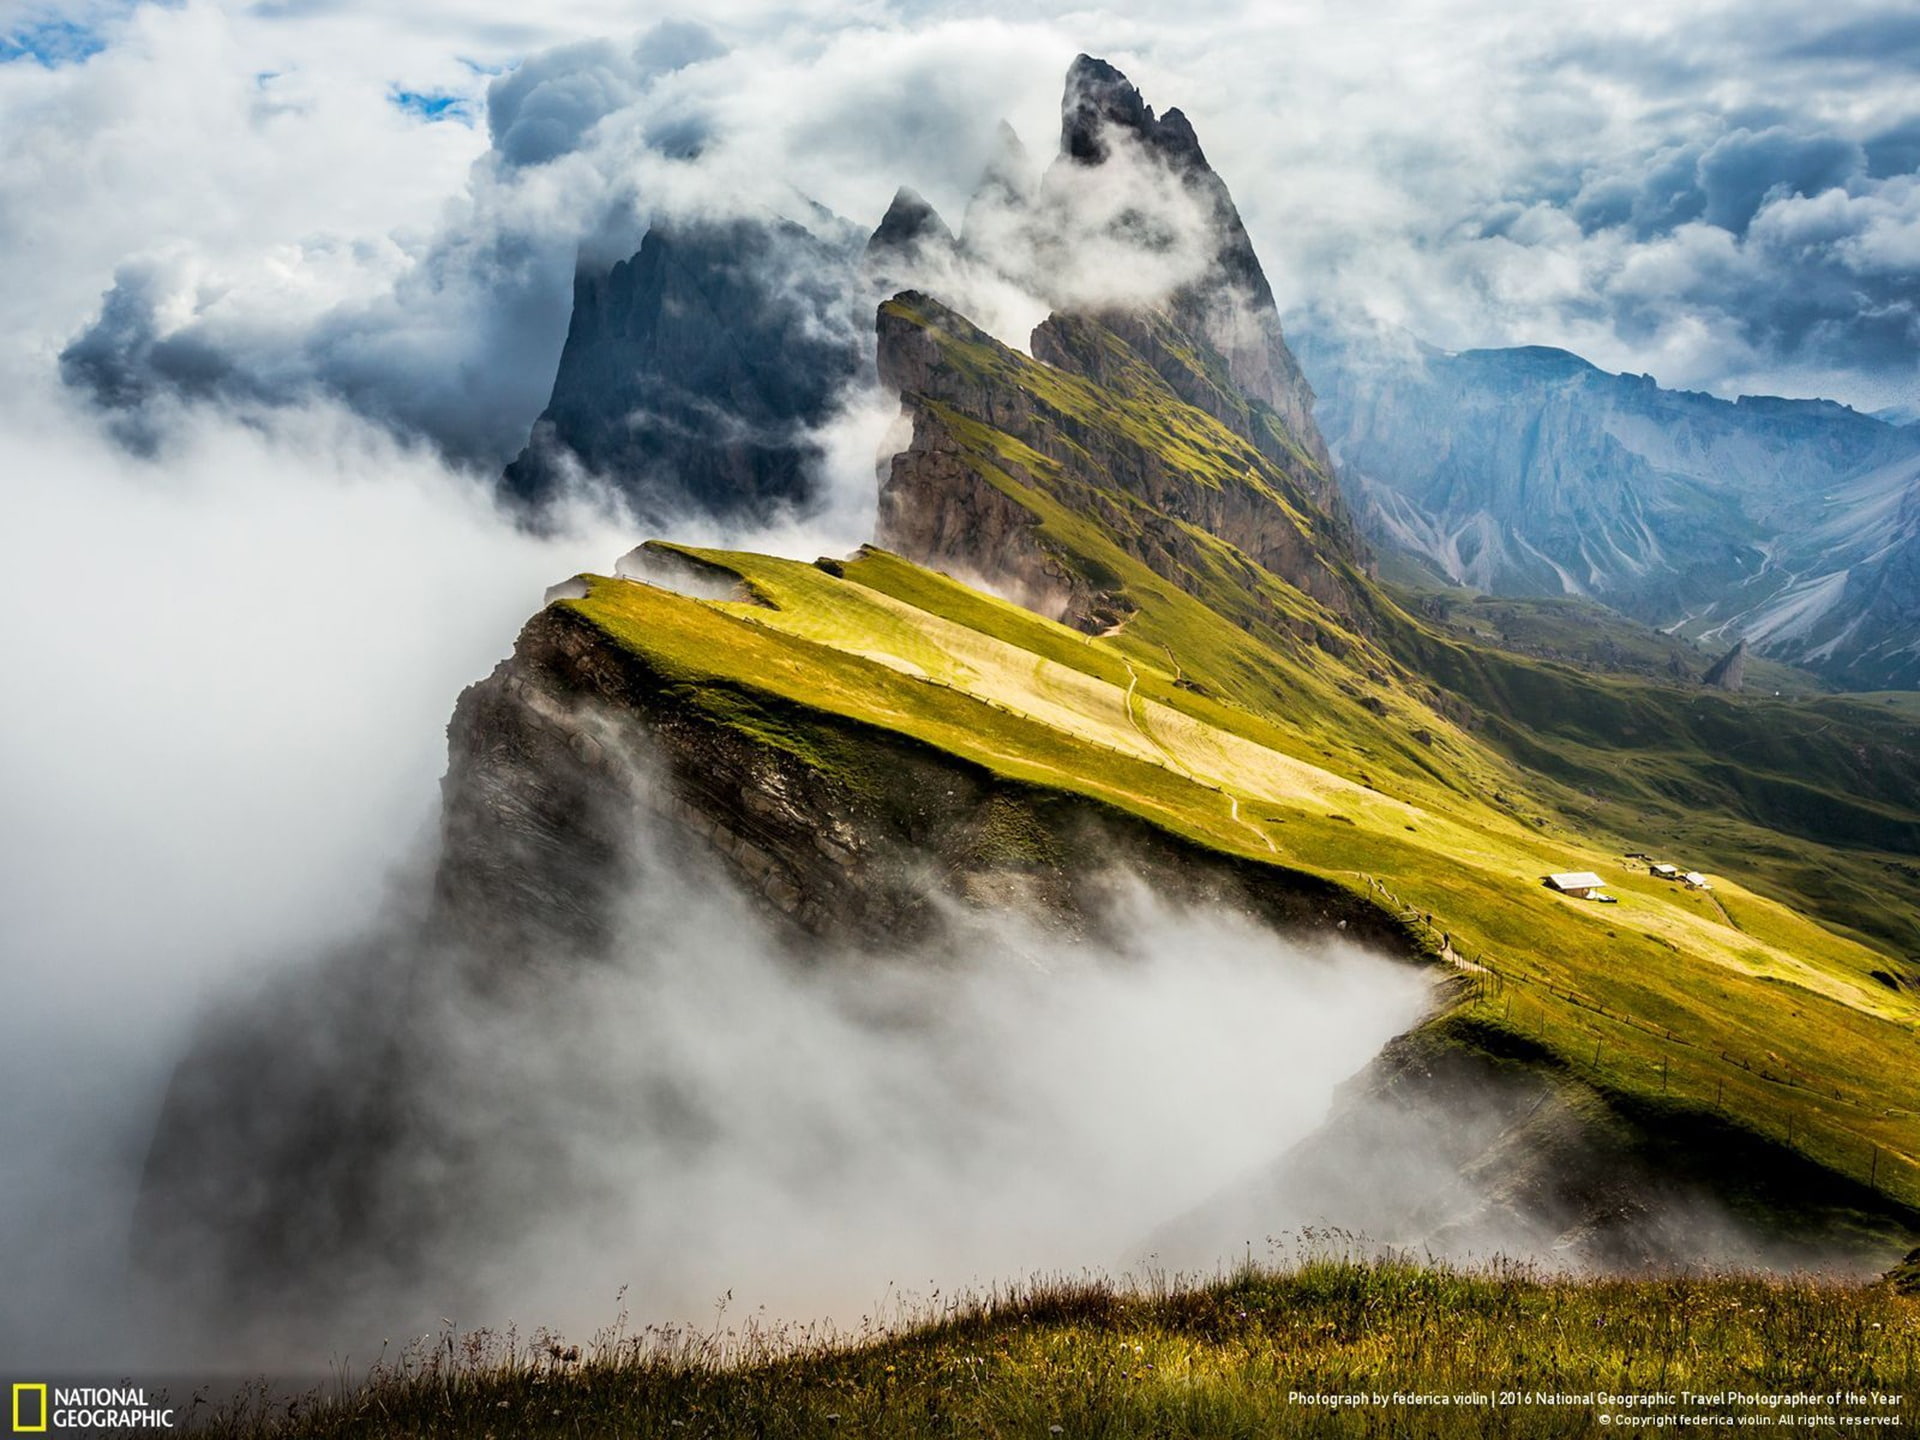 Ortisei Trentino Italy-National Geographic Wallpap.., cloud - sky